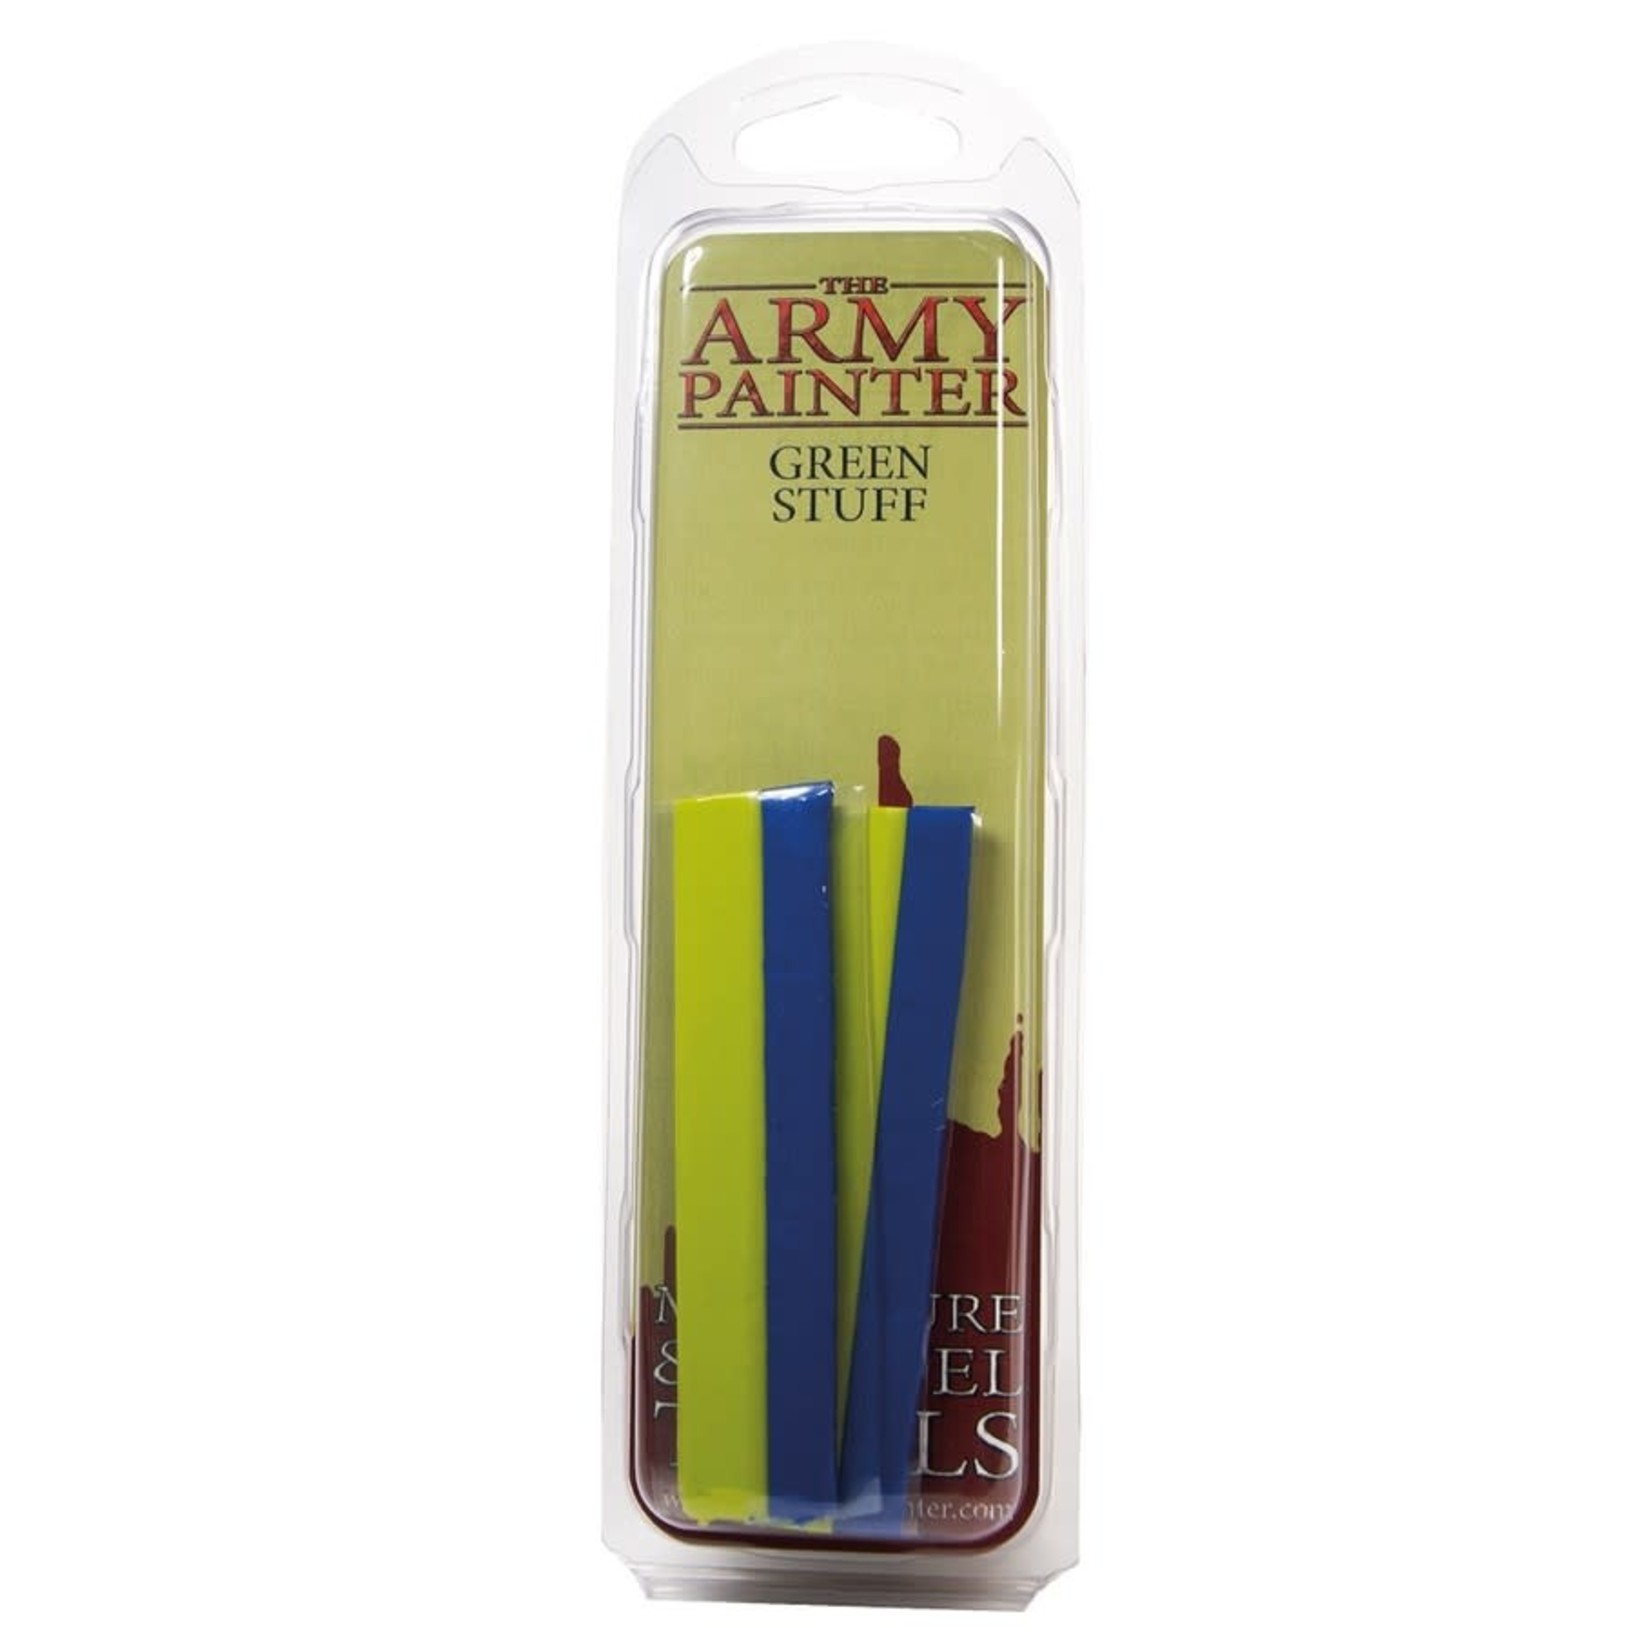 The Army Painter Miniature & Model Tools: Green Stuff